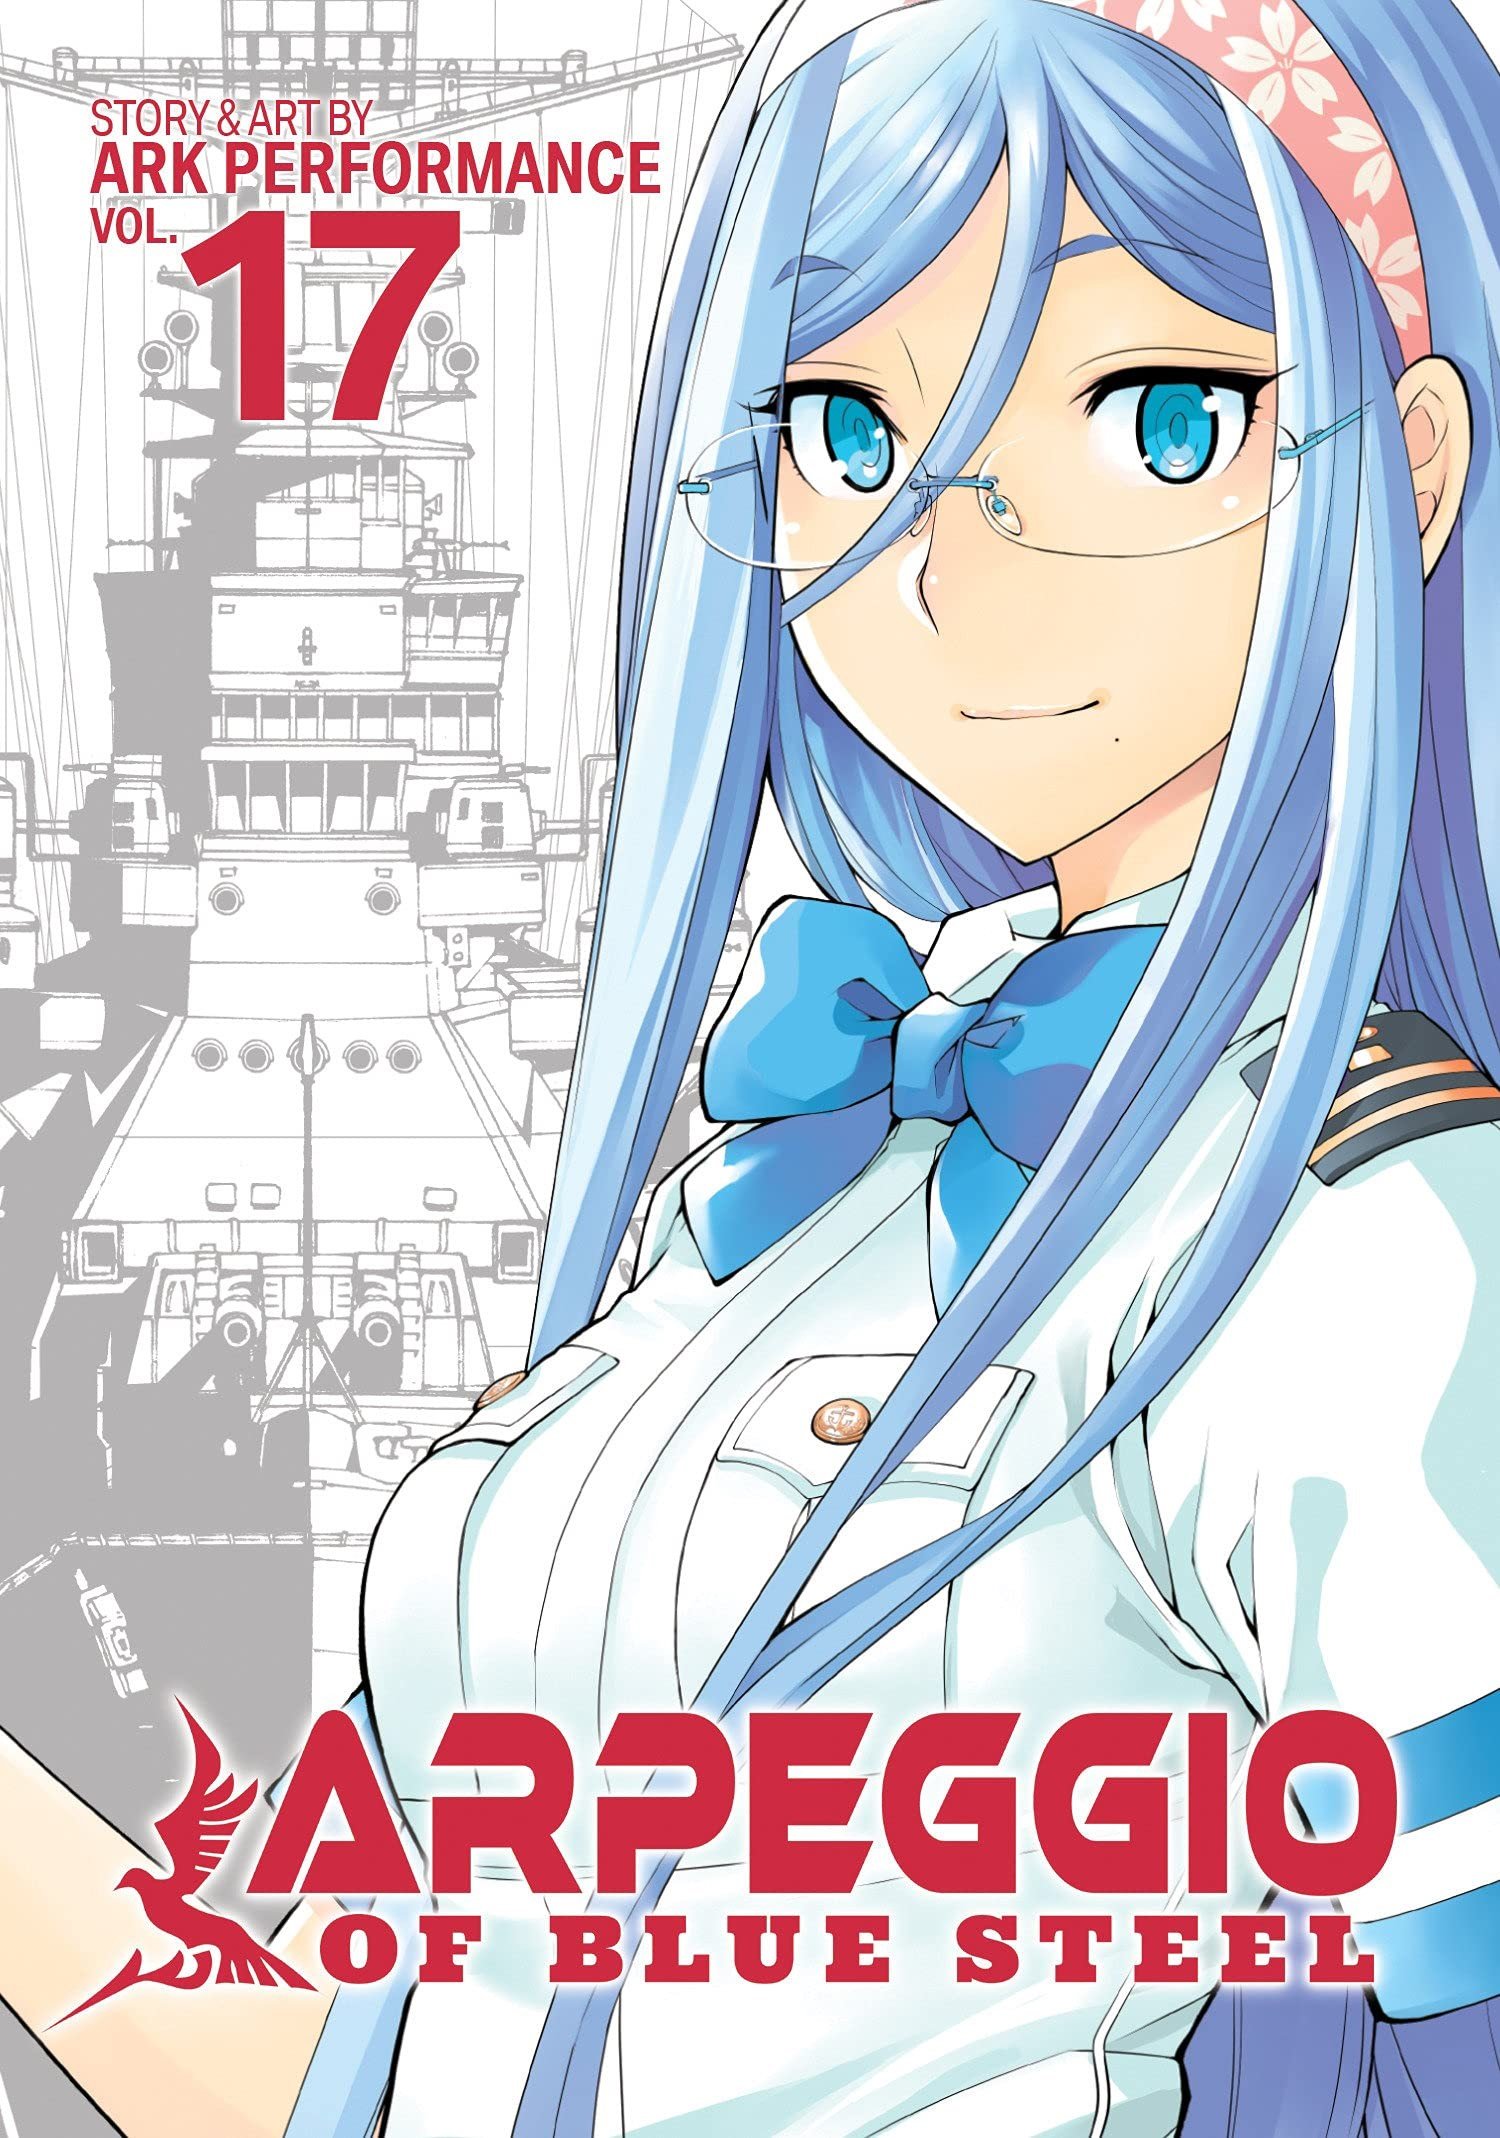 Arpeggio of blue steel  Anime  World of Warships official forum